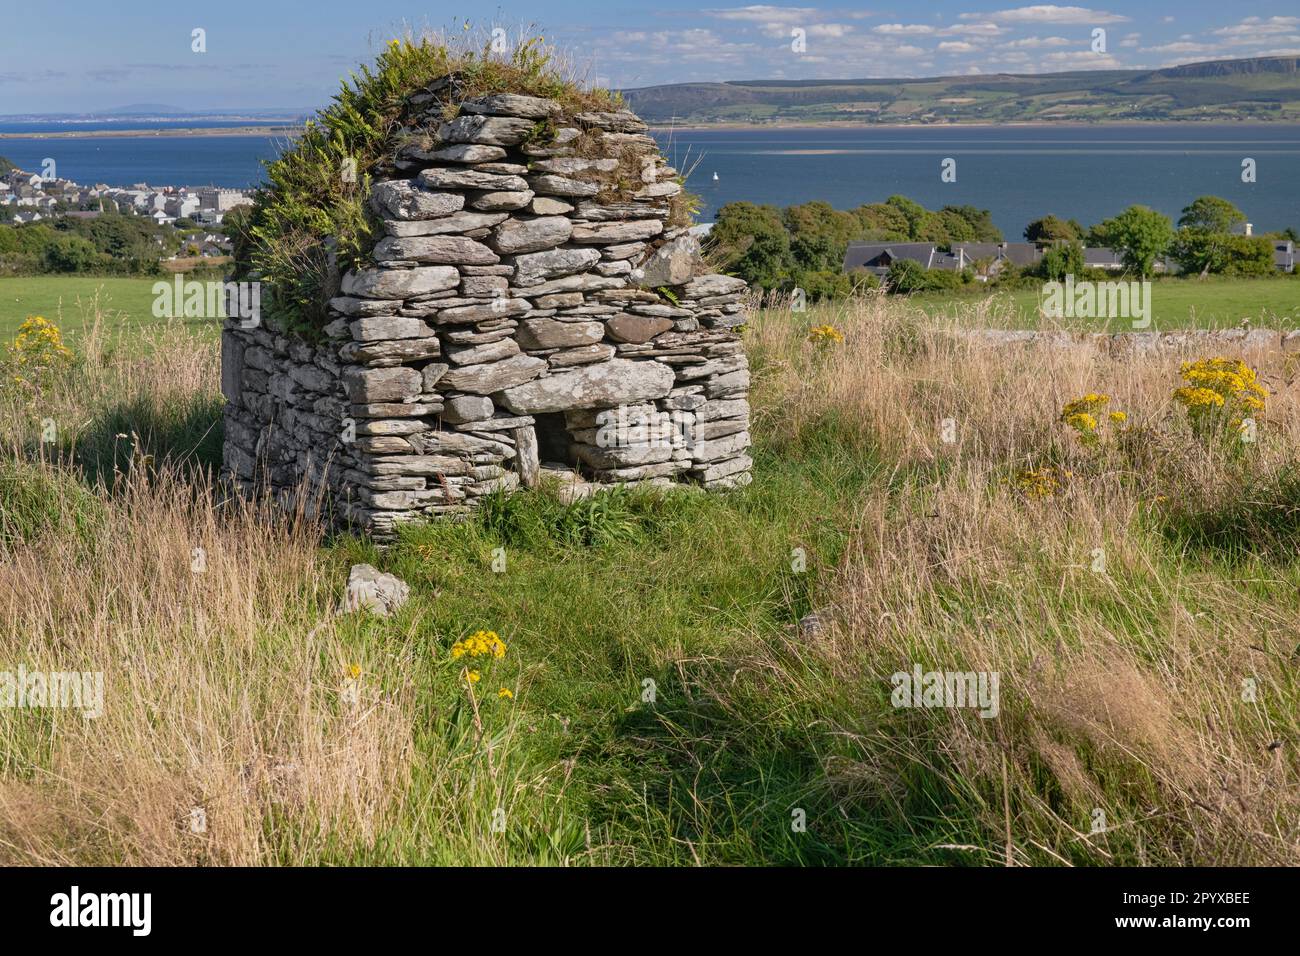 Ireland, County Donegal, Inishowen Peninsula, Moville monastic site, The Skull House which may have been an oratory or an ancient tomb for local saint Stock Photo